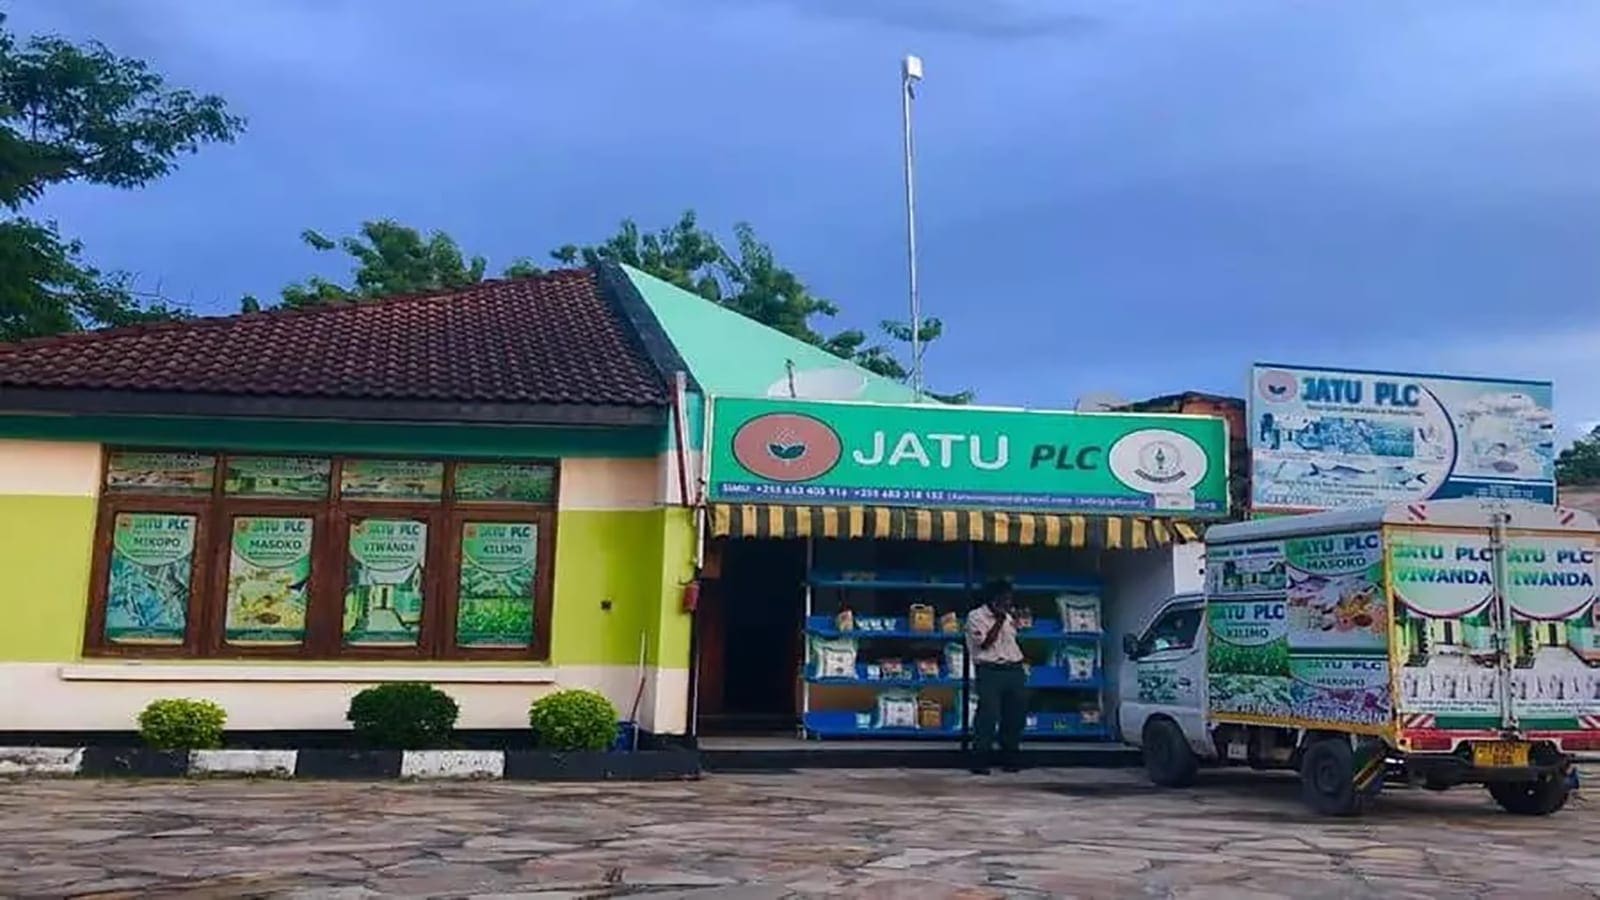 Tanzanian agribusiness company Jatu PLC seeks to raise US$3.2m through IPO for business expansion